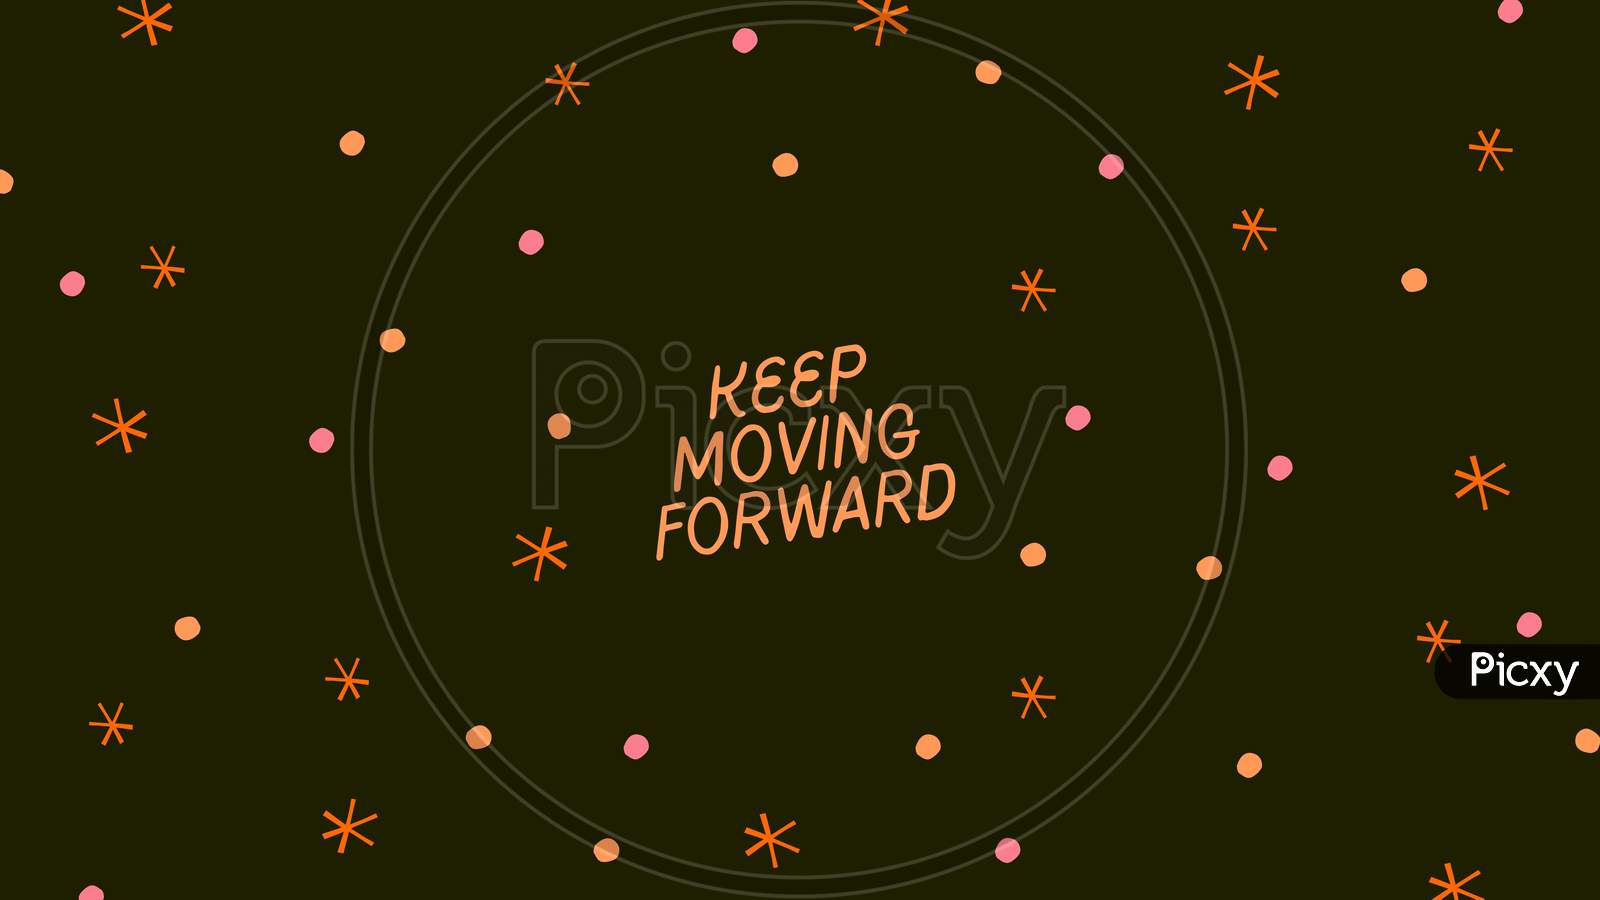 179 Just Keep Moving Images Stock Photos  Vectors  Shutterstock